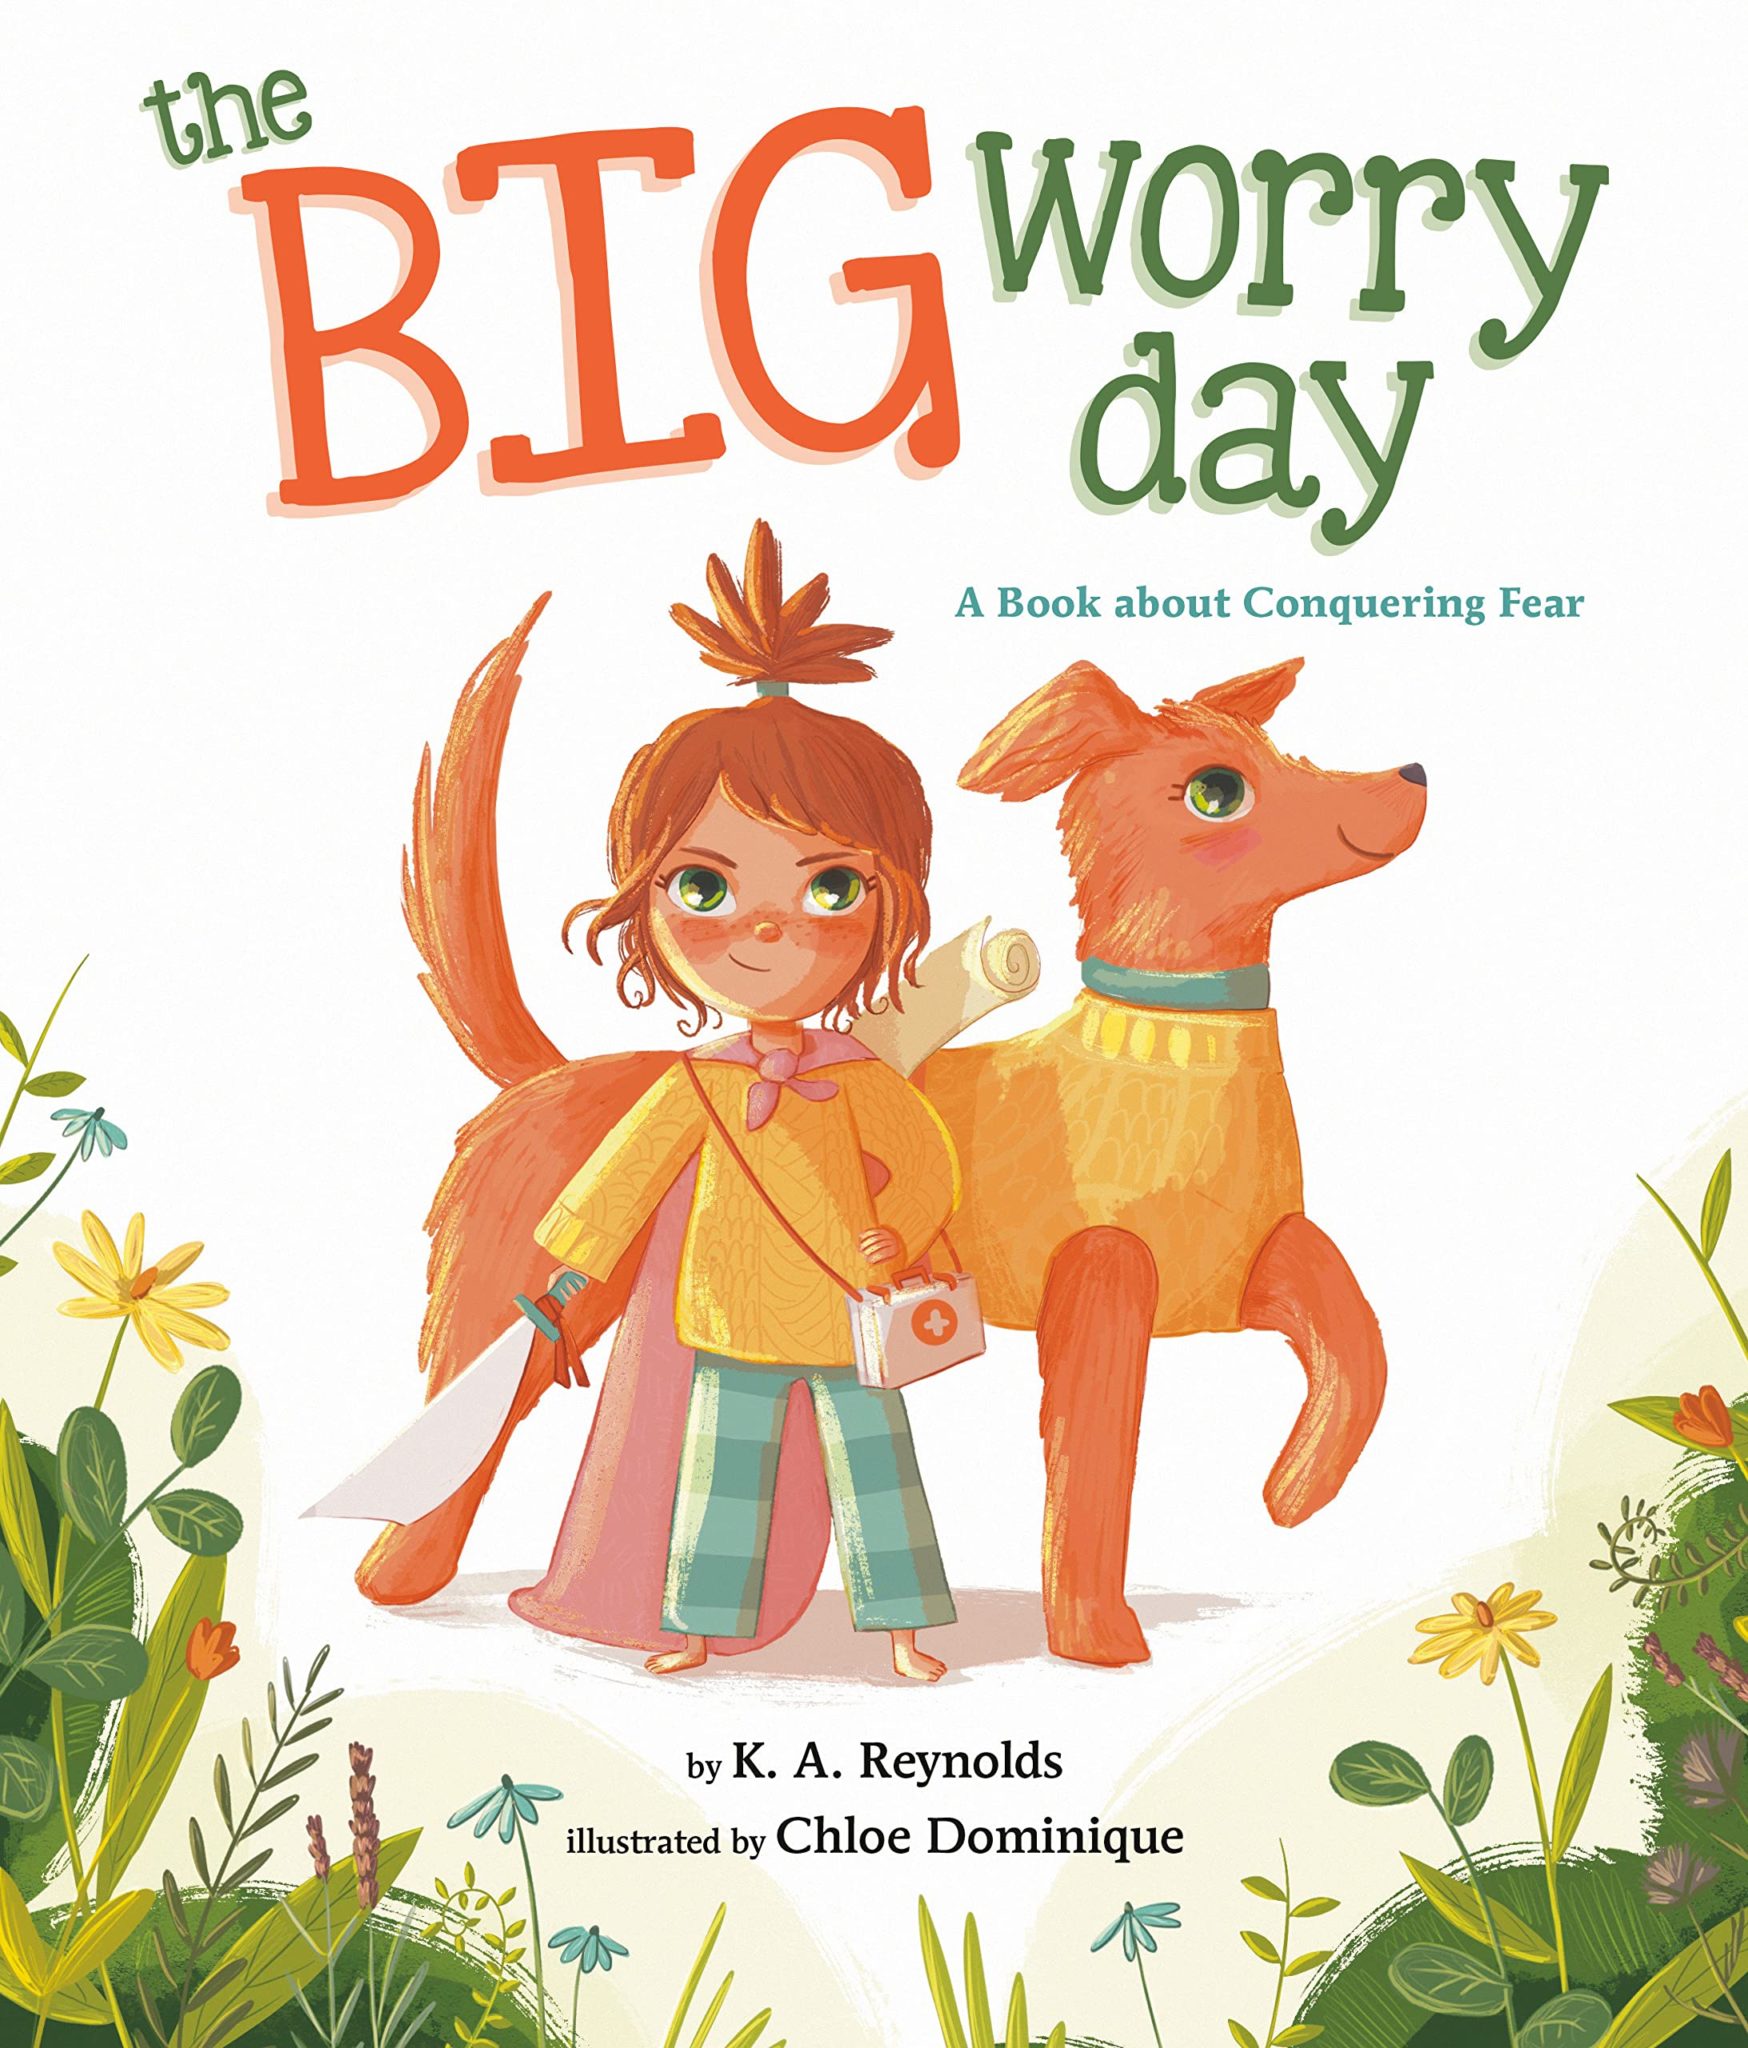 The cover of the picture book "The Big Worry Day" features a red-headed little girl and her dog wearing matching sweaters. The girl bravely holds a toy sword and looks ready for the day ahead.